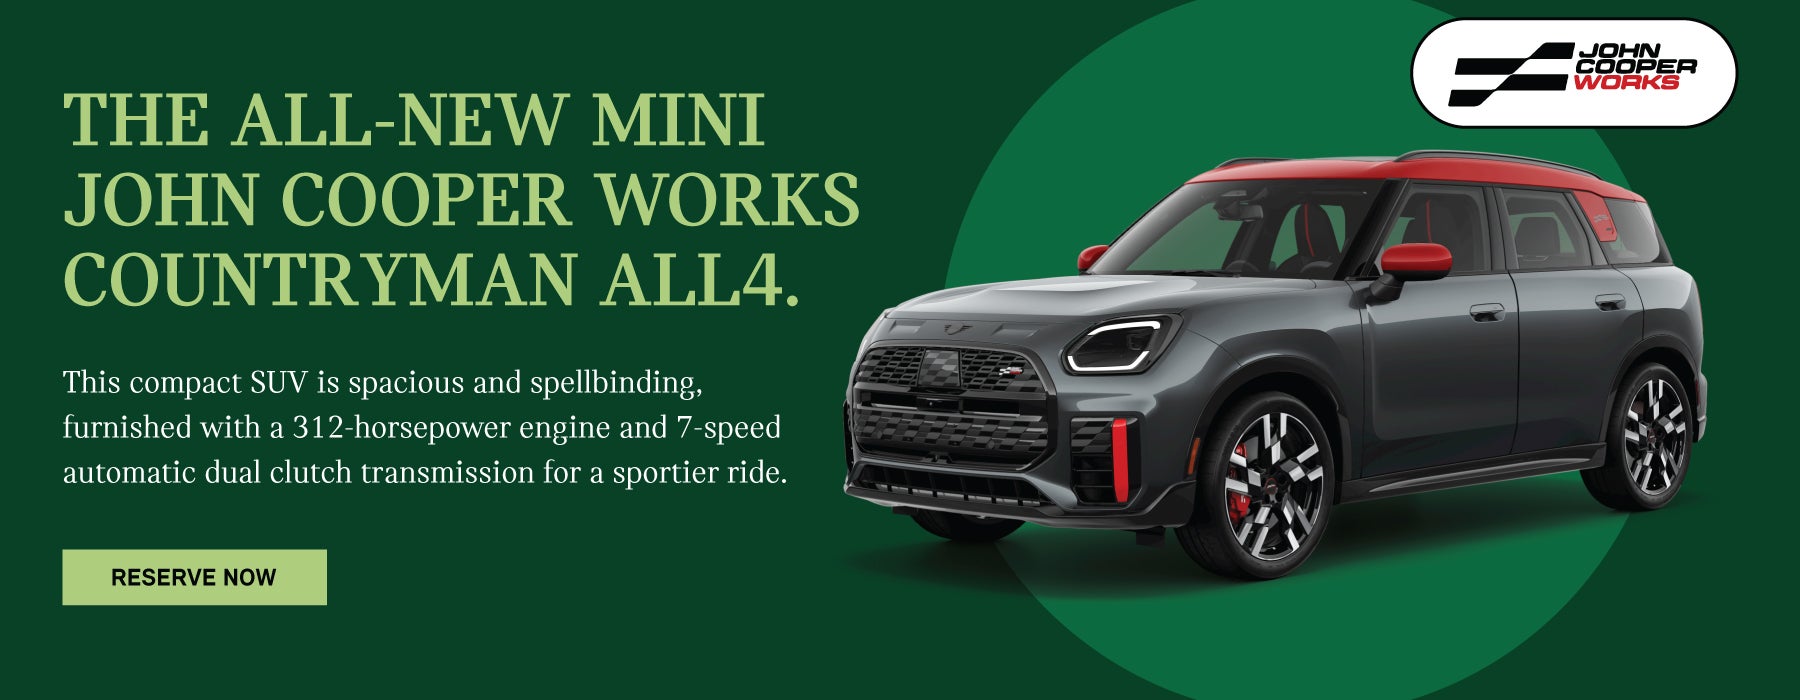 Pictured is a MINI JCW Countryman ALL4 in a retro pop theme